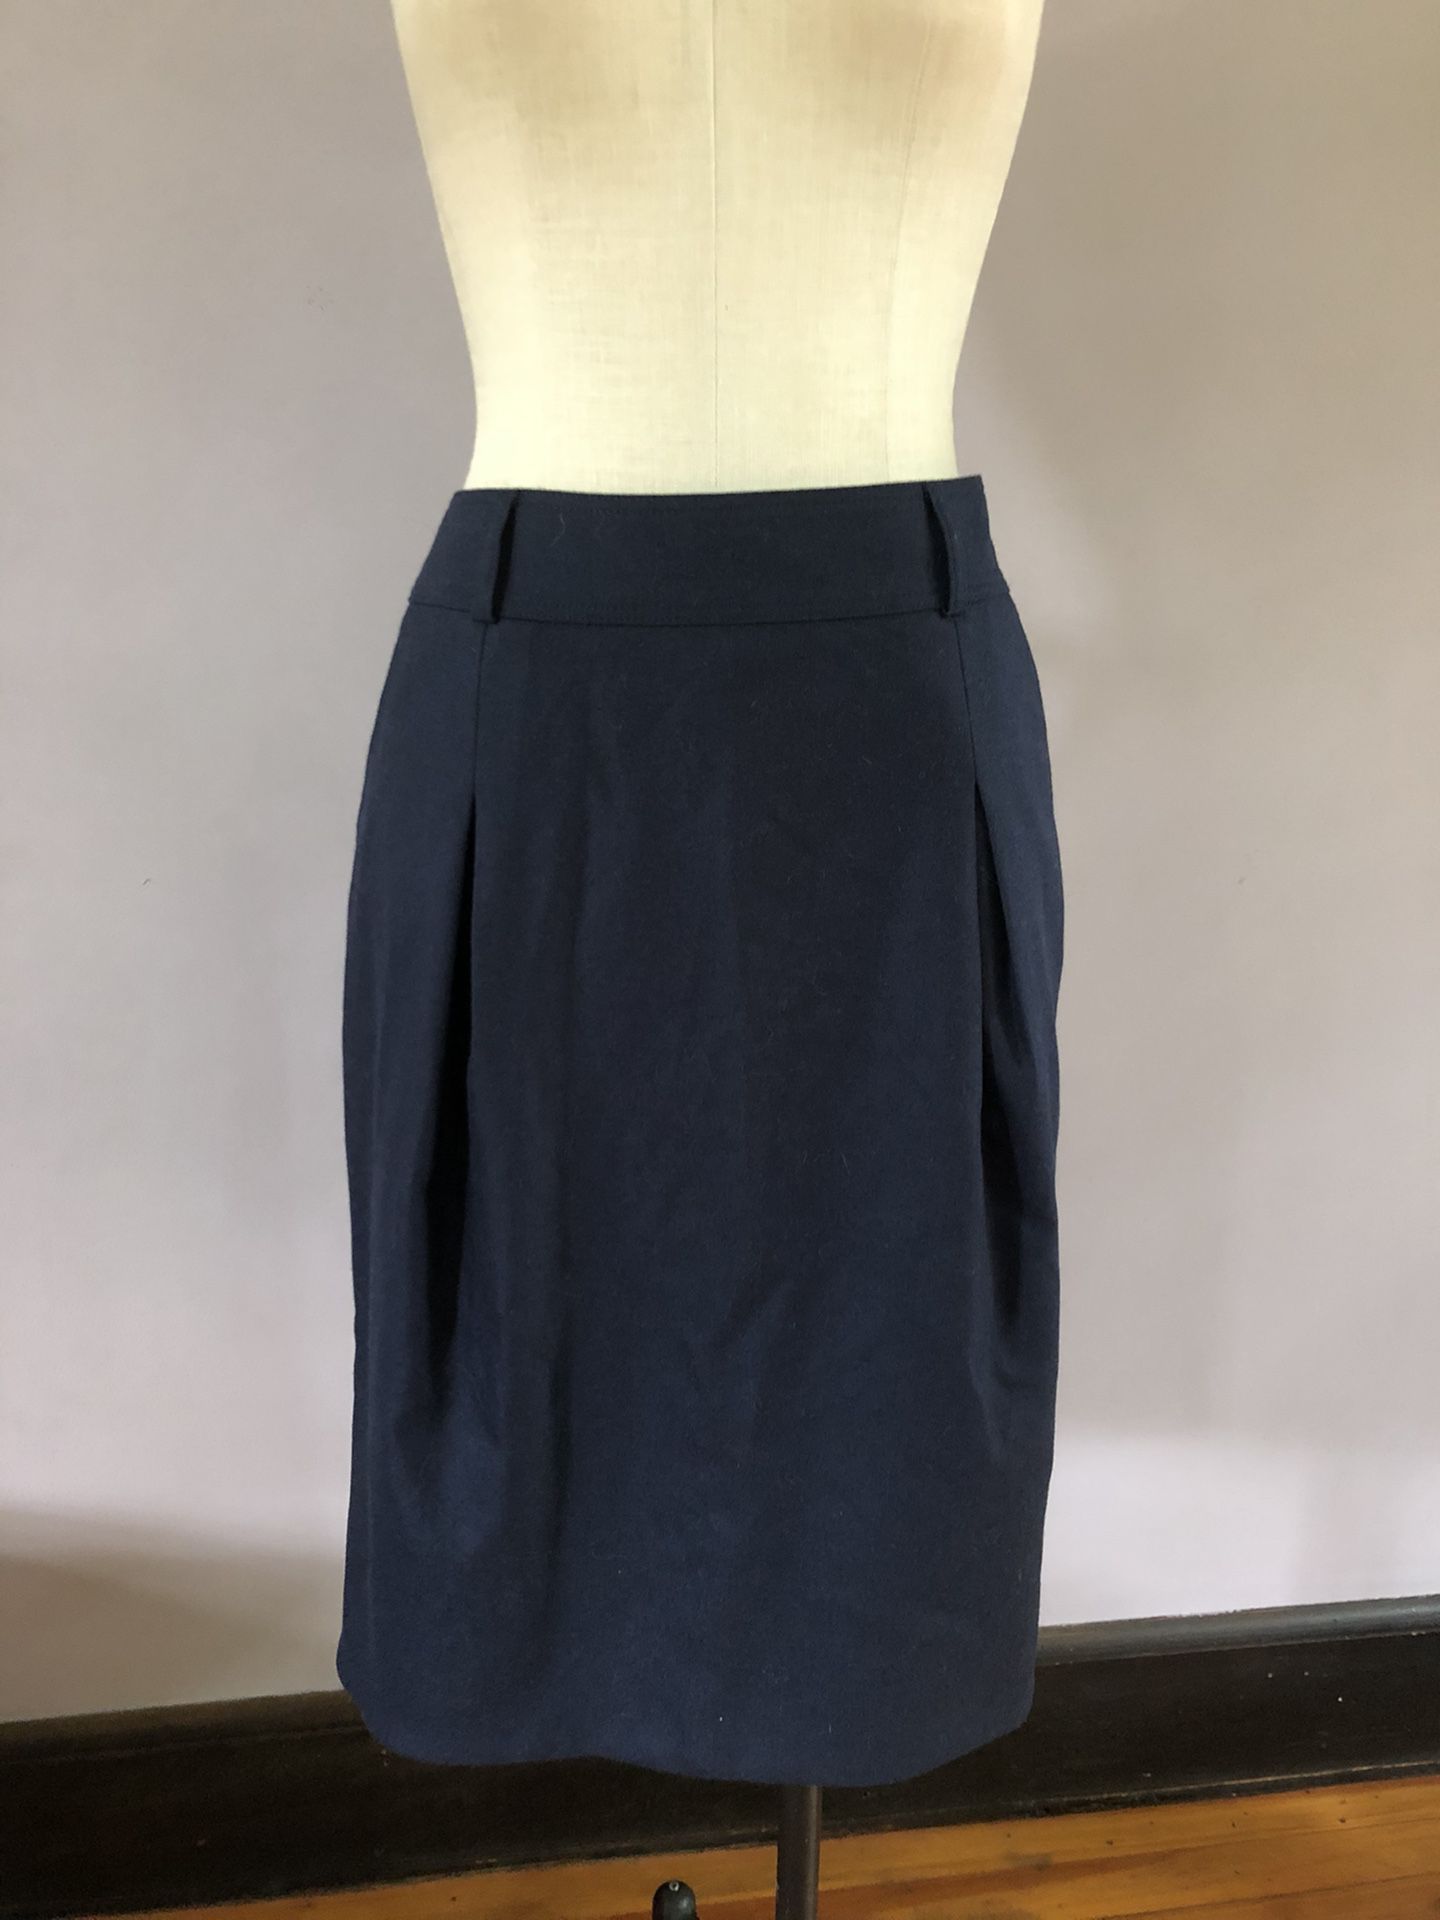 Angora and cashmere navy blue Burberry skirt. Size US8. Hardly worn.